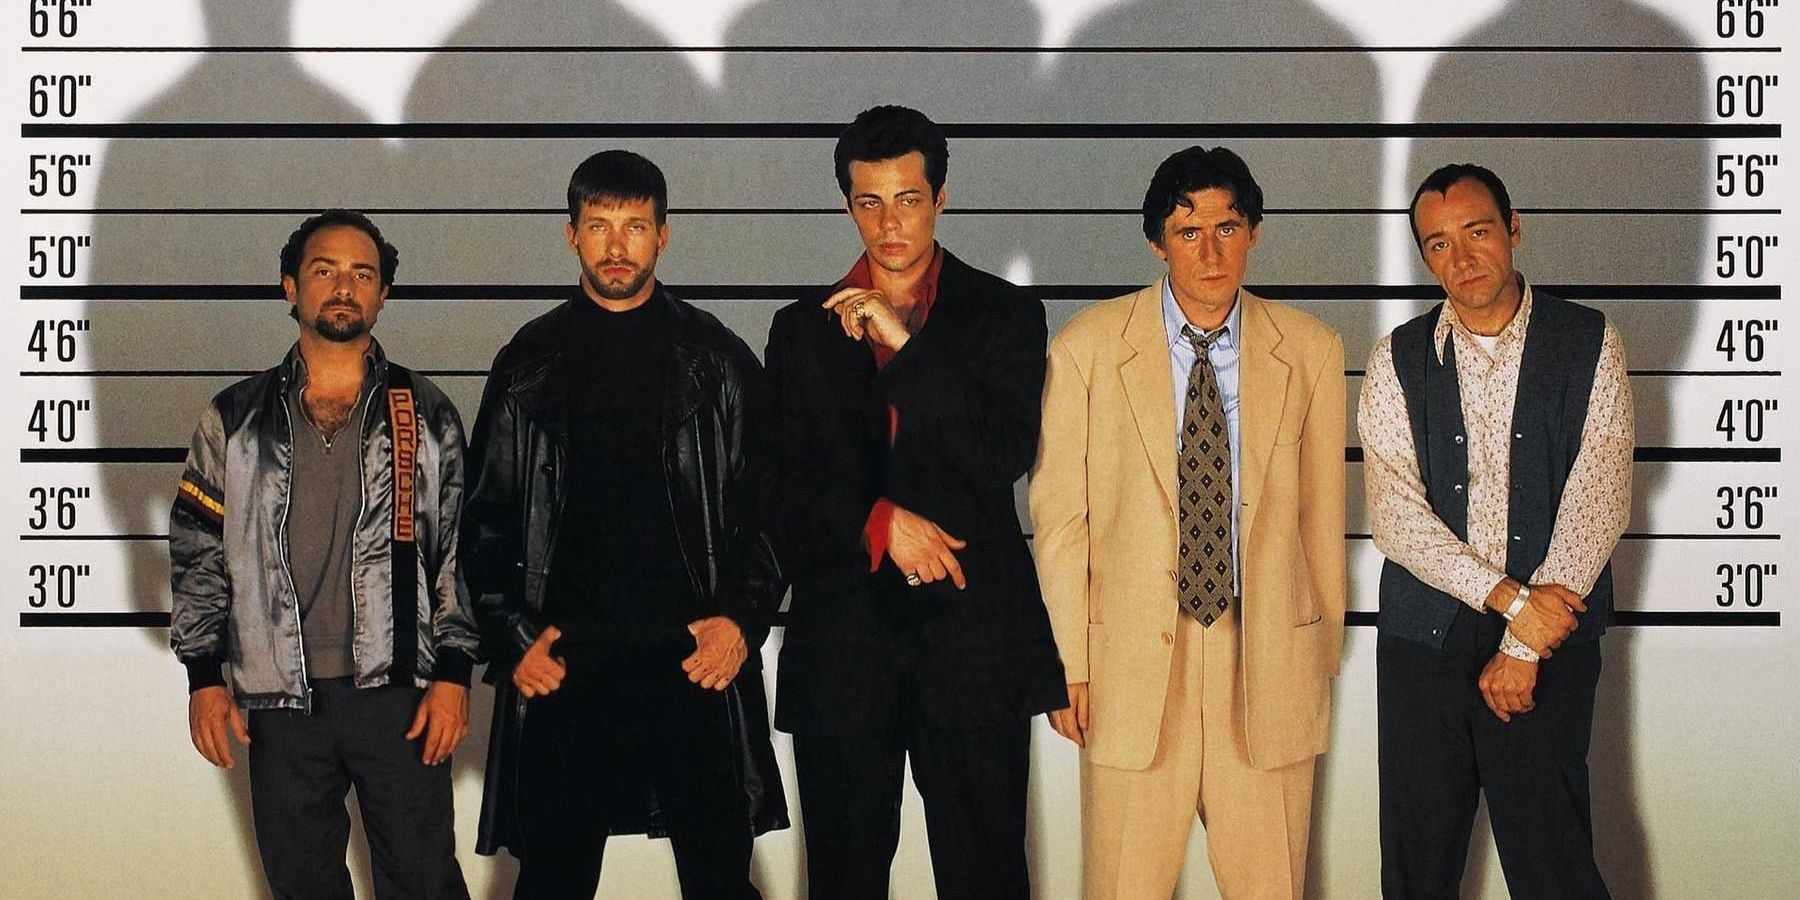 The main characters in the police line up in The Usual Suspects